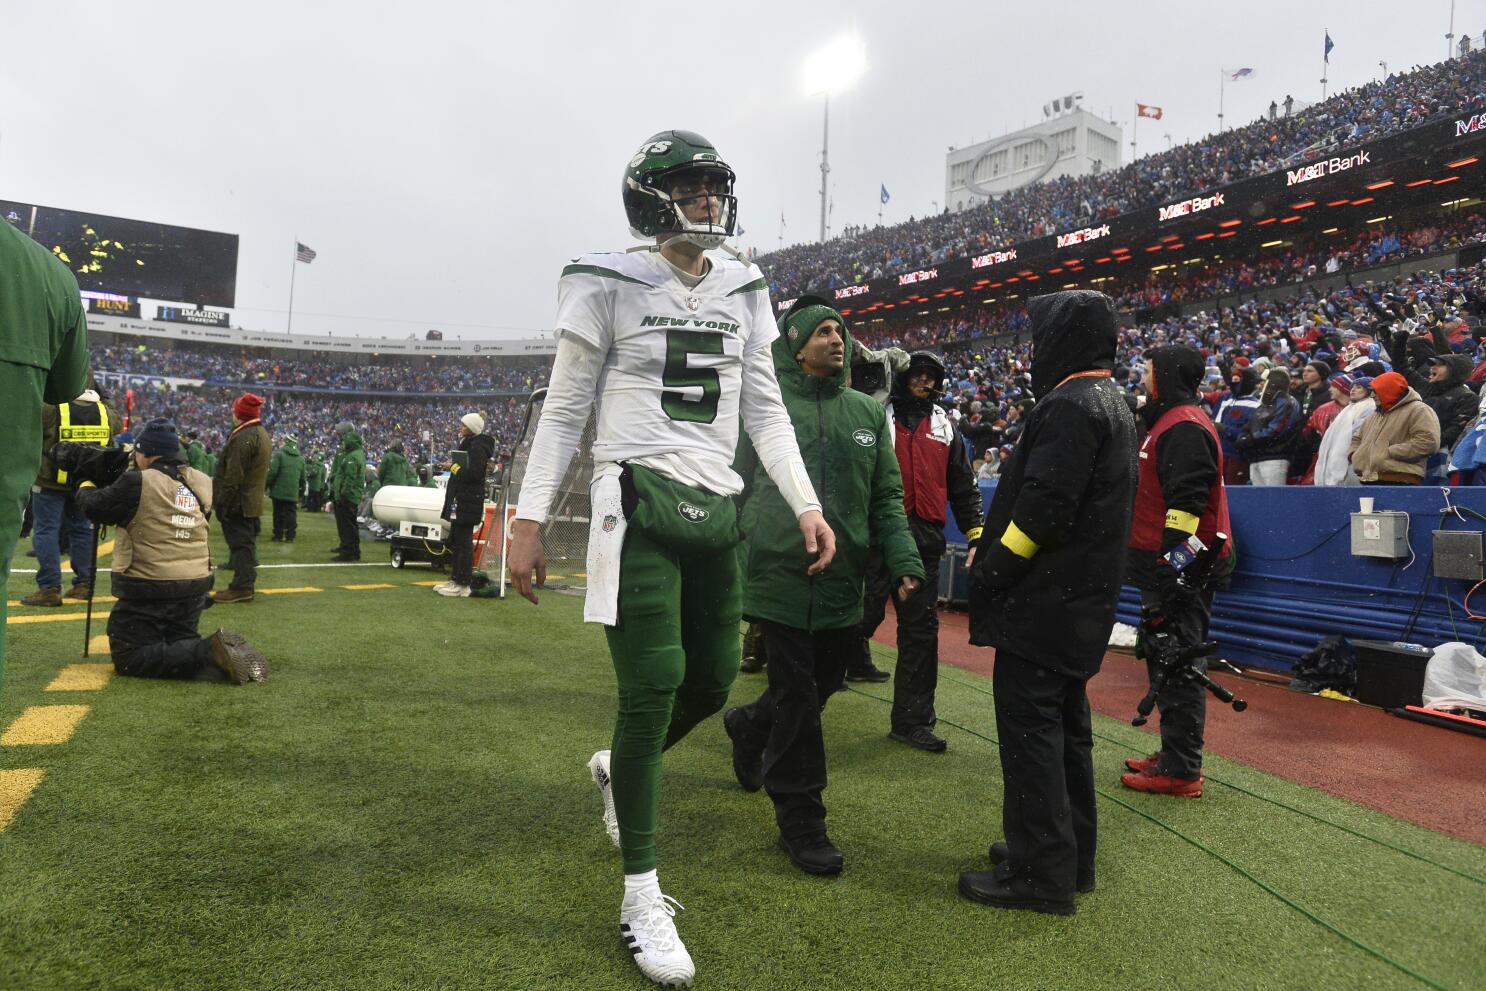 Jets' White 'ready to roll' after hits sent him to hospital - The